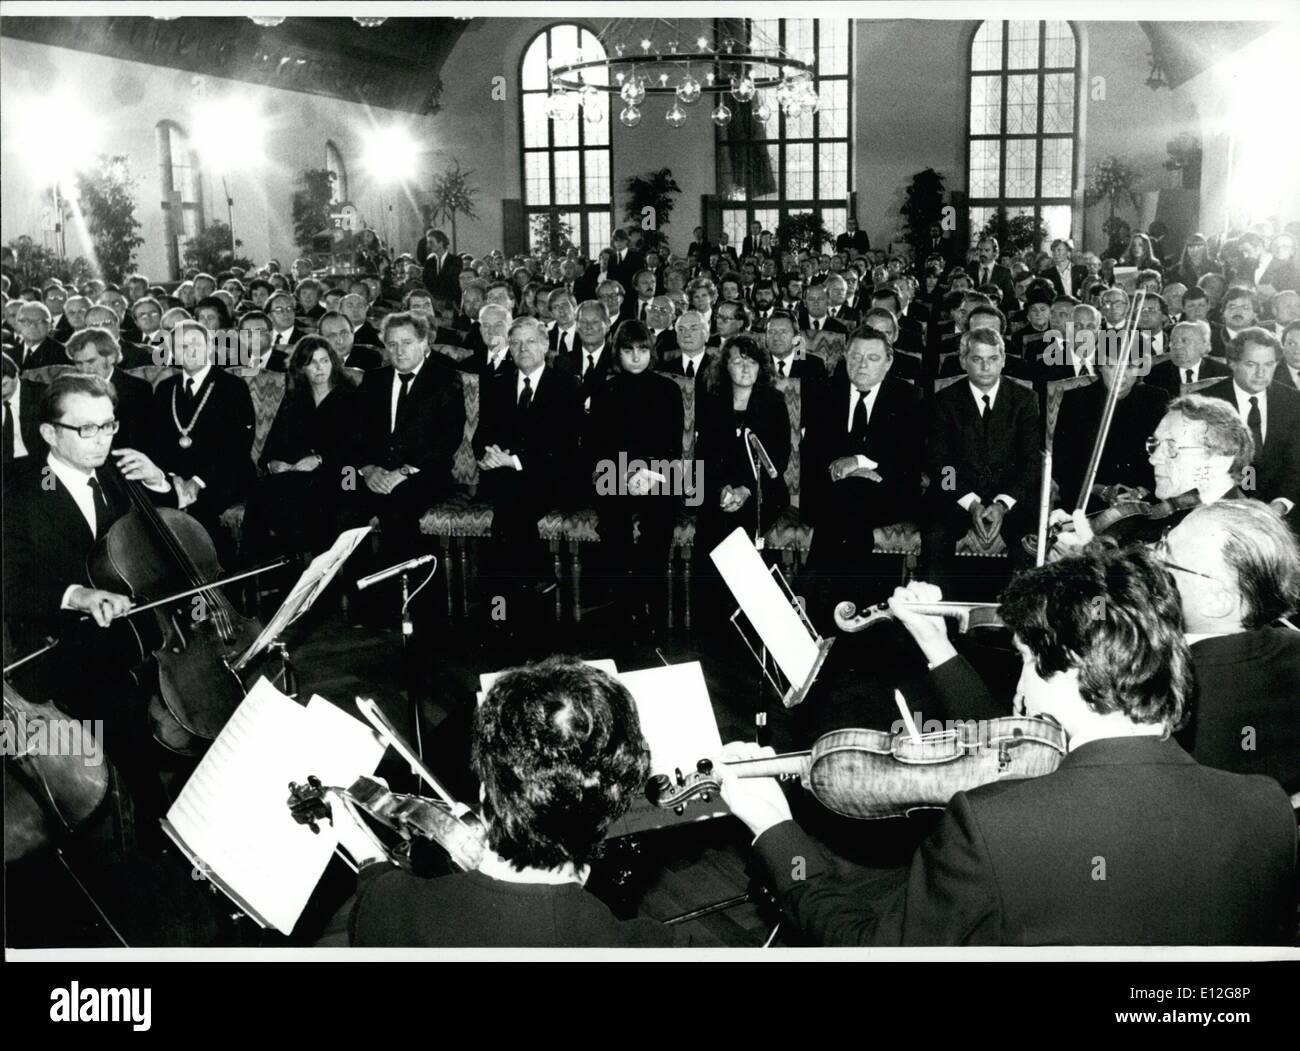 Dec. 26, 2011 - Funeral Service In Munich For The Victimes Of The Bomb Attempt At Munich Oktoberfest: On September 30th. 1980 a Stock Photo